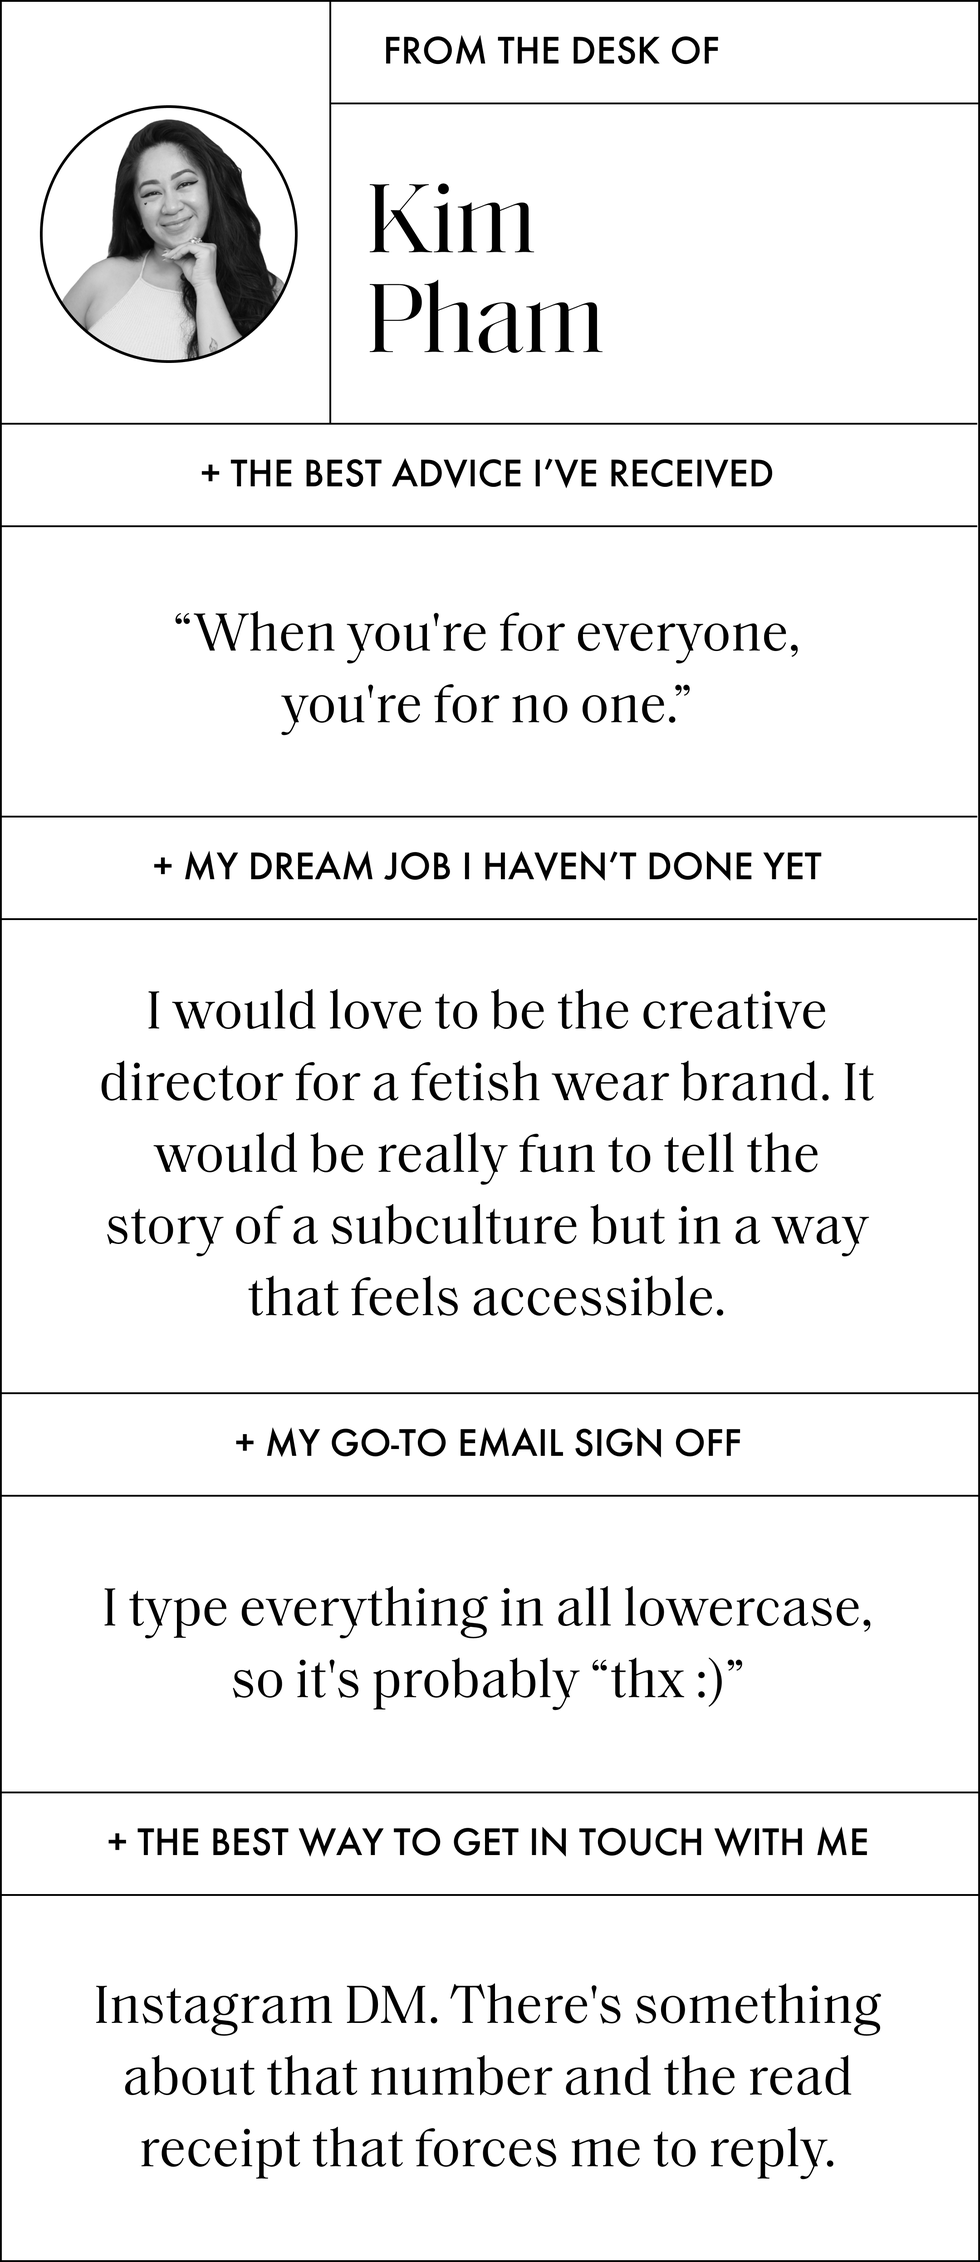 a q and a with kim pham that says the best advice i have ever received when you're for everyone, you're for no one my dream job i have not done yet i would love to be the creative director for a fetish wear brand it would be really fun to tell the story of a subculture but in a way that feels accessible my go to email sign off i type everything in all lowercase, so it is probably thx the best way to get in touch with me instagram dm there's something about that number and the read receipt that forces me to reply